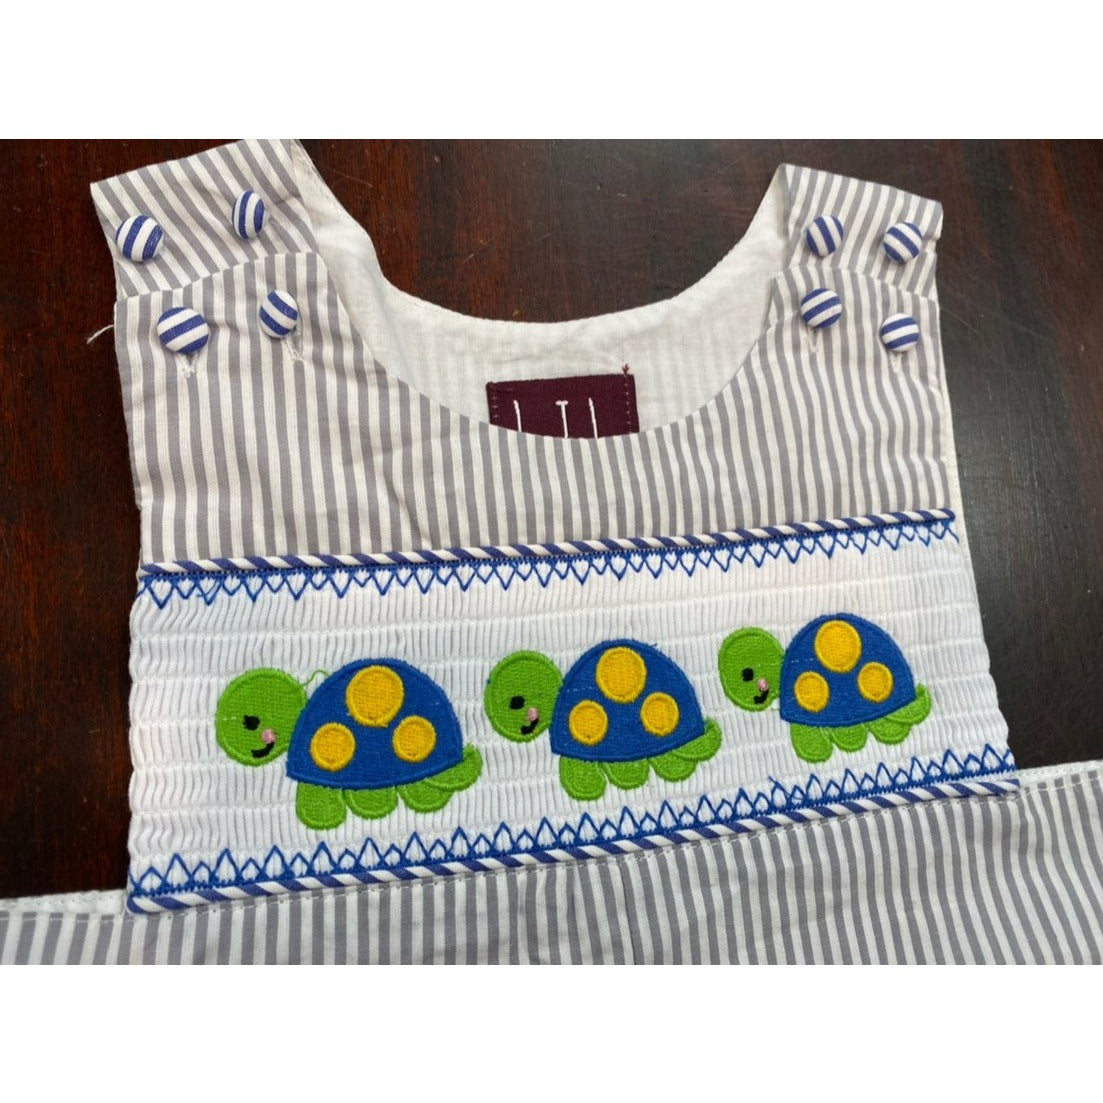 6-12 months Smocked turtle longall